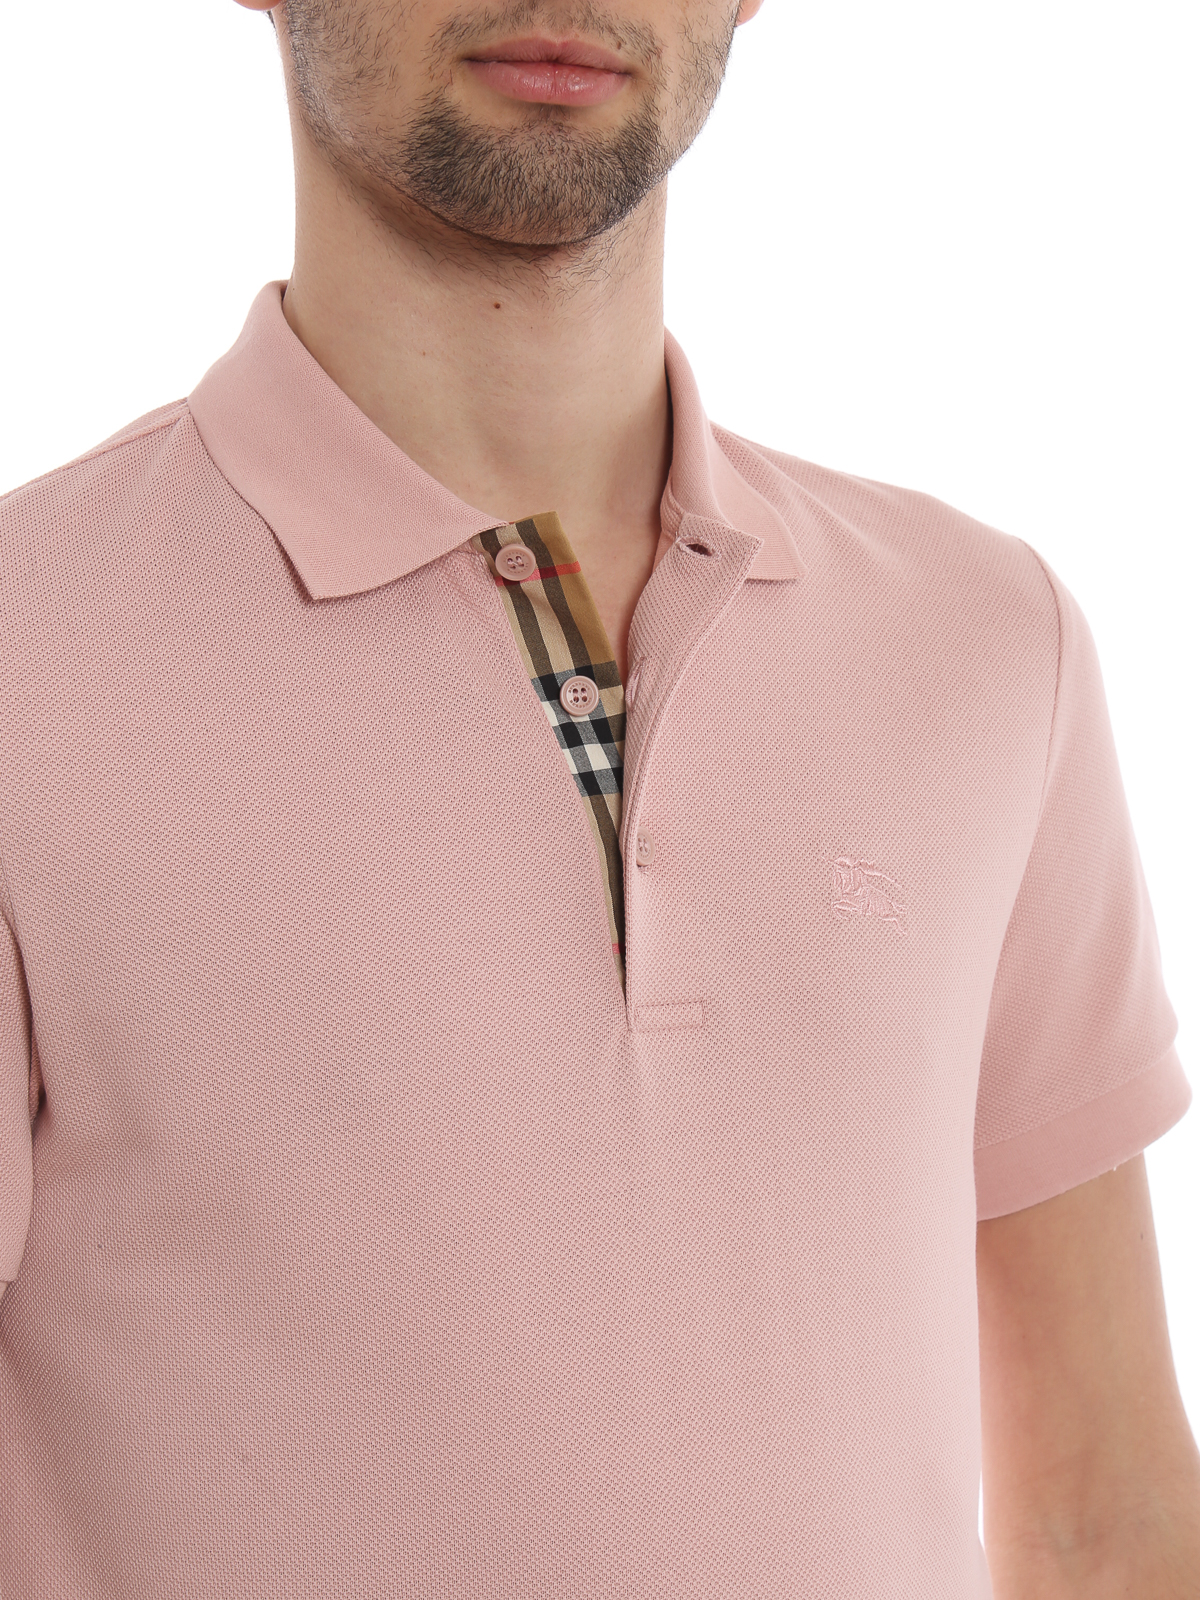 burberry polo mens pink